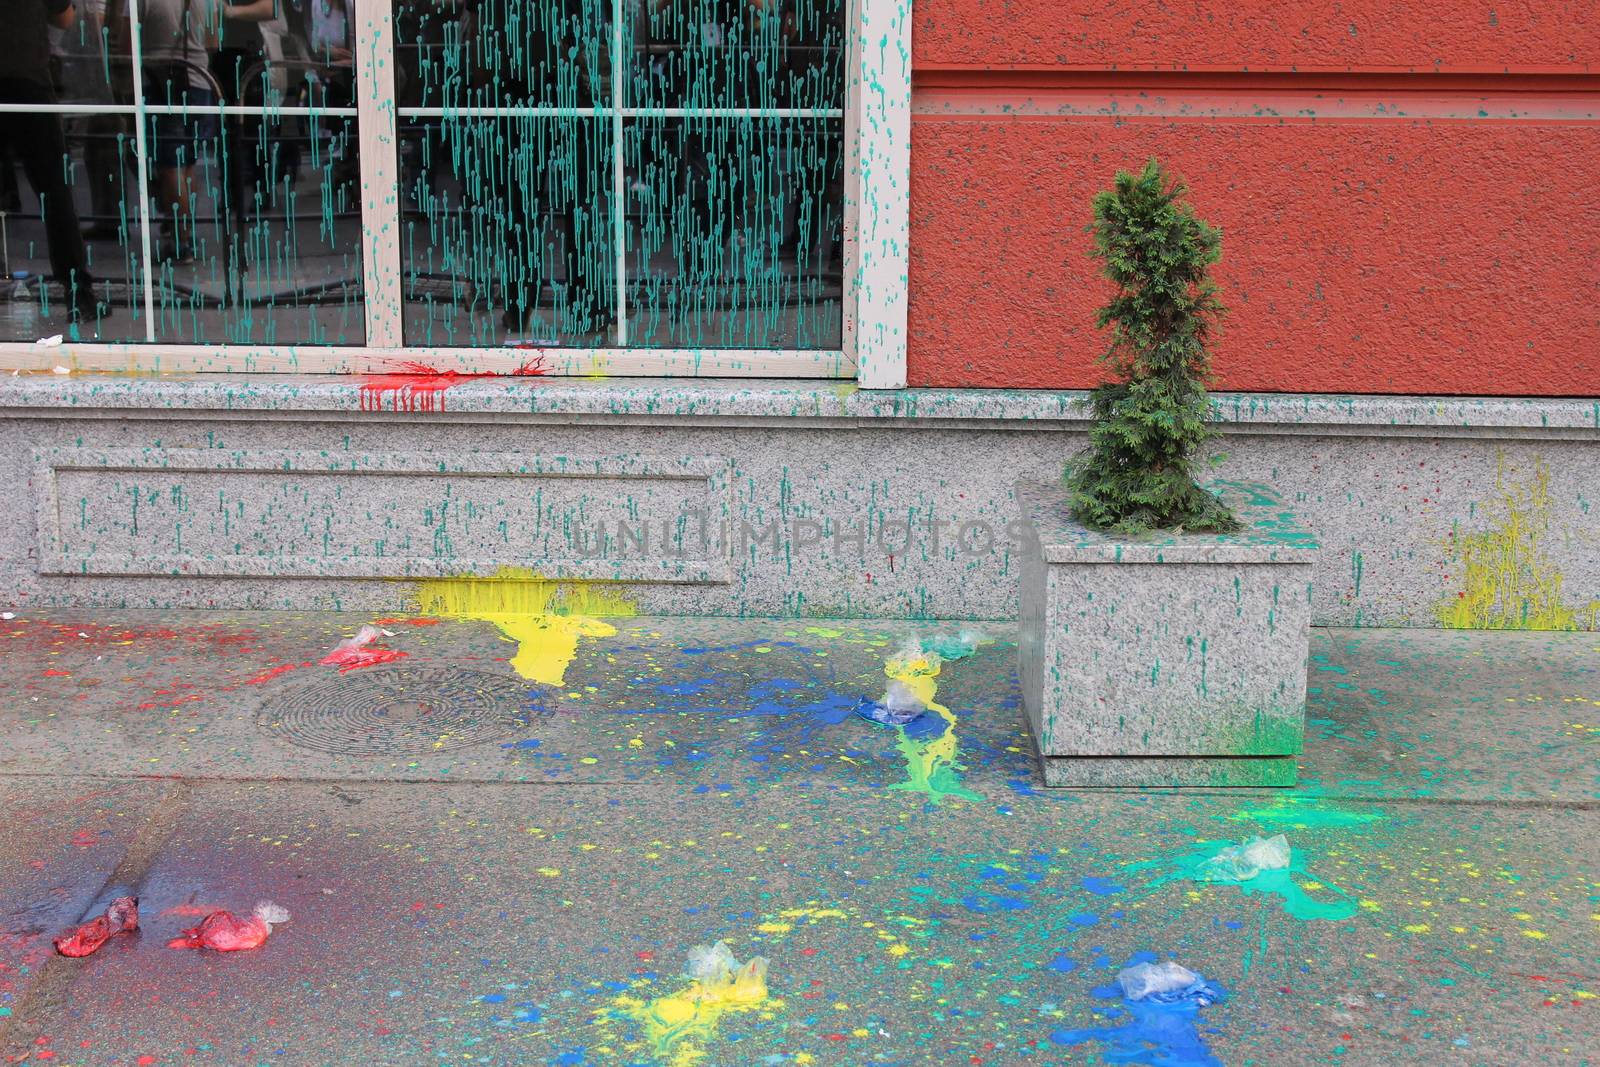 MACEDONIA, Skopje: Paint spatter covers the ground as thousands continue anti-government protests in Skopje, Macedonia on April 19, 2016. The protests began nearly one week ago, as demonstrators denounced President Gjorge Ivanov's decision to halt probes into more than 50 public figures involved in a wiretapping scandal. Meanwhile, snap elections have been called for June 5.